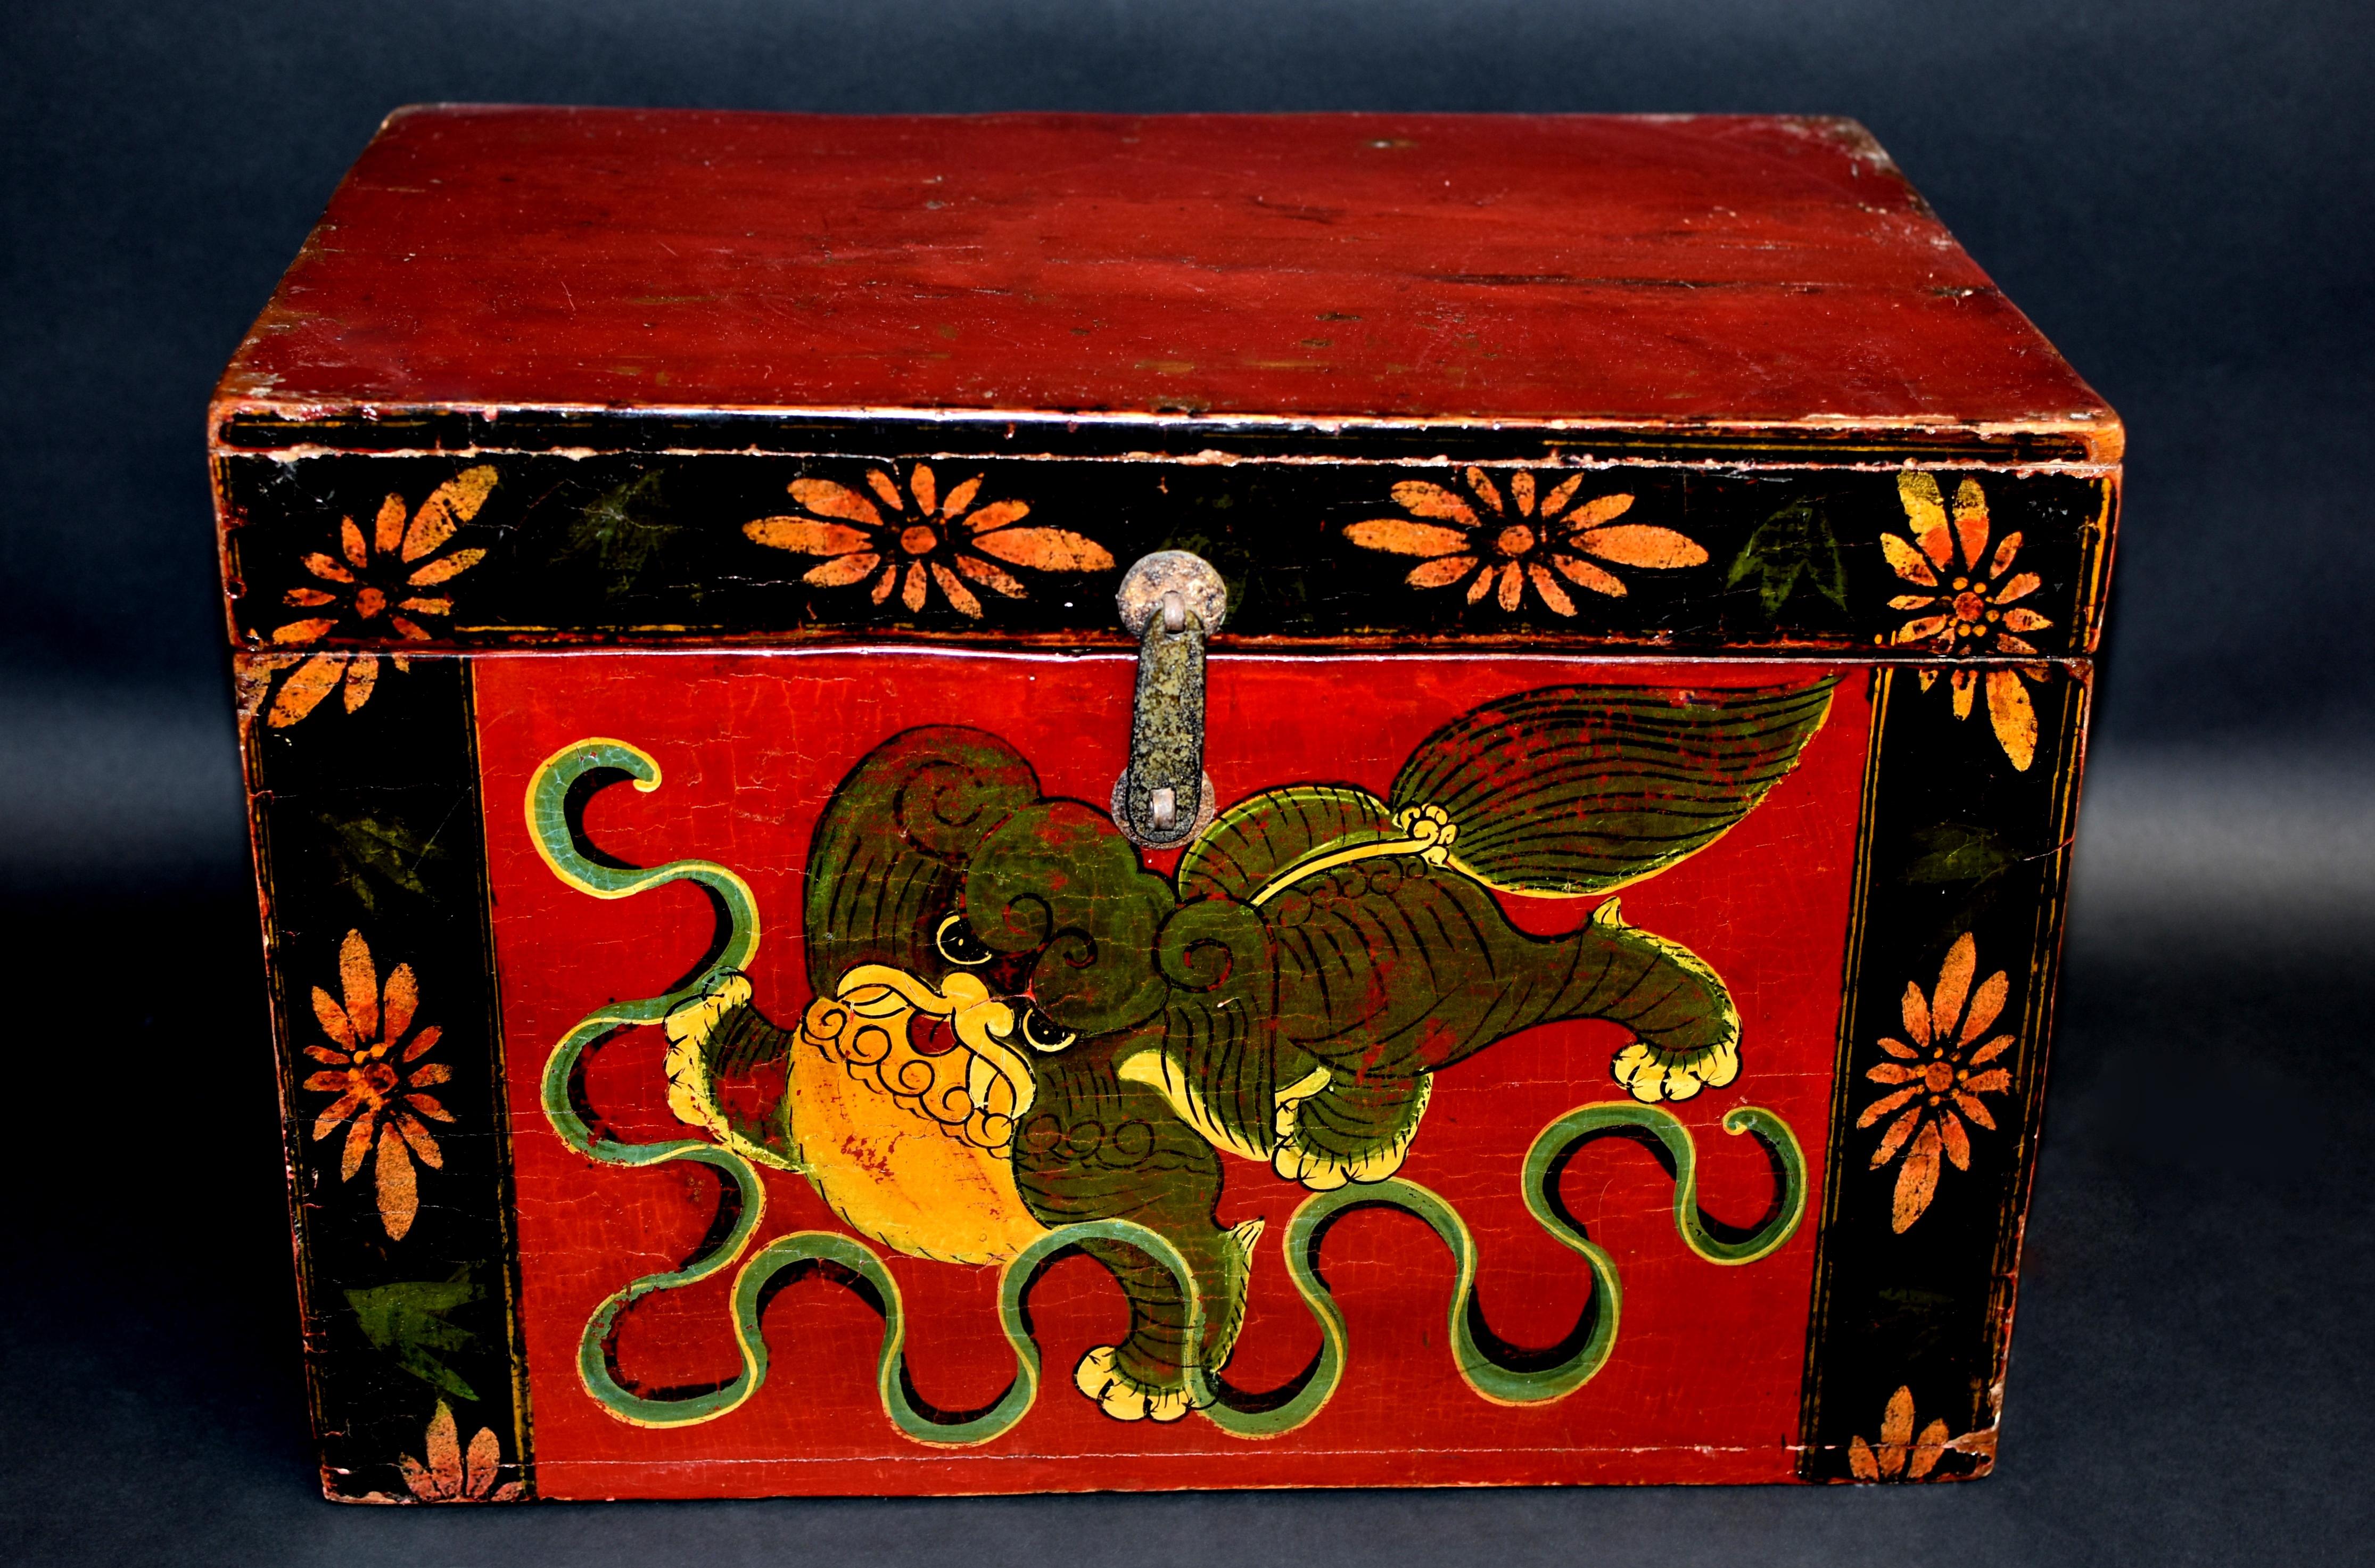 One of our most adorable foo dogs among our limited antique foo dog box collection. The large head with large innocent eyes and red lips framed by curled mane. Fleshy paws, three pressing into the ground, one open and in air trying to catch the